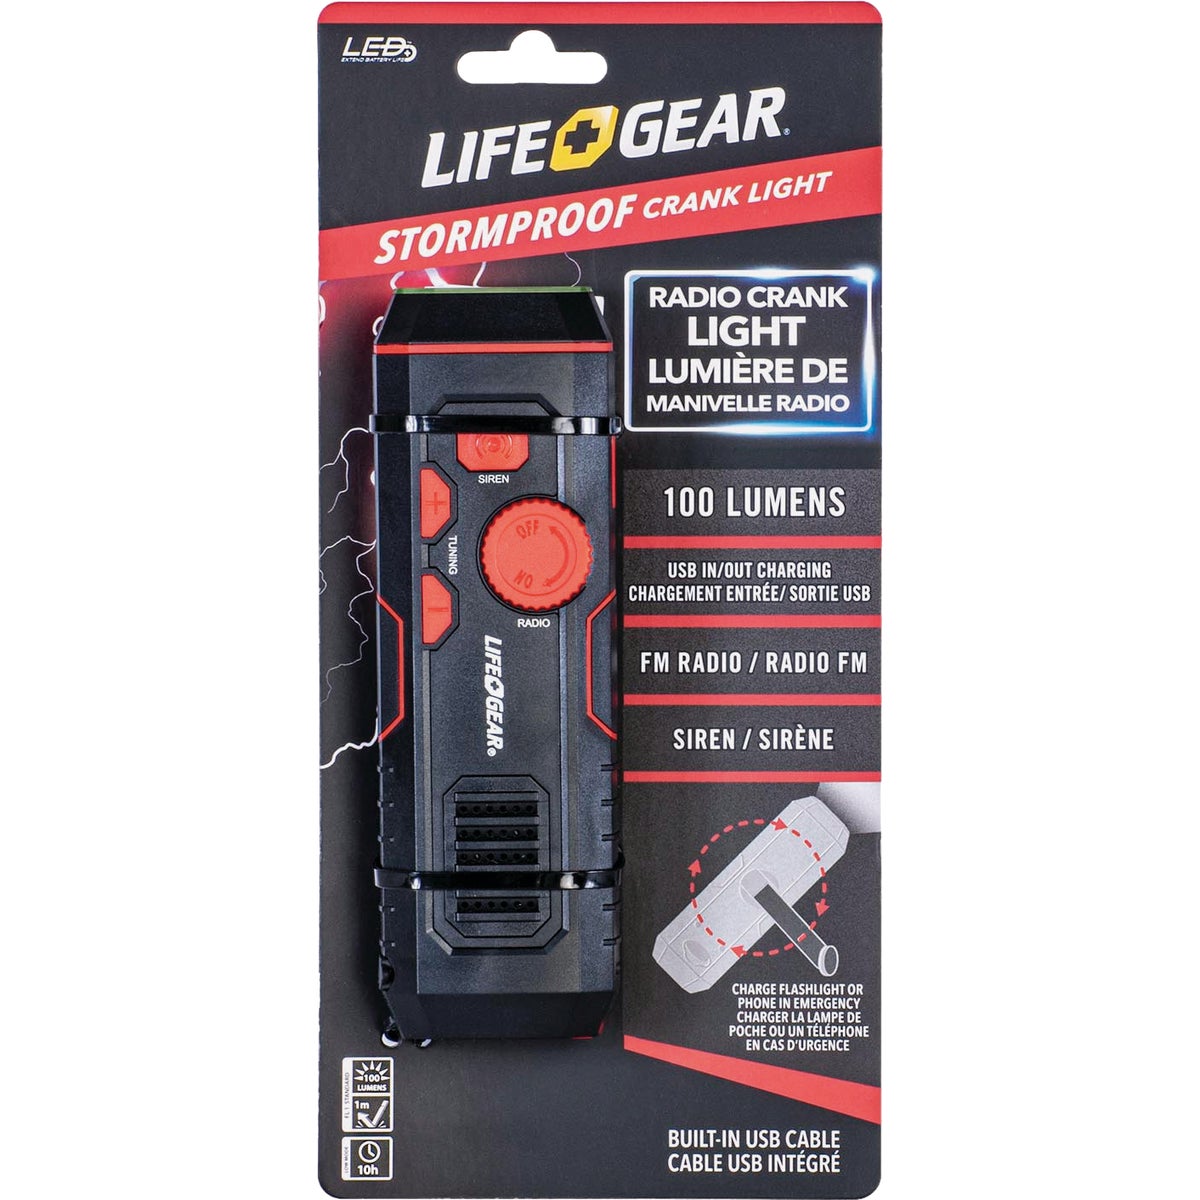 Life Gear Storm Proof LED 100 Lm. Crank Emergency Light and Radio